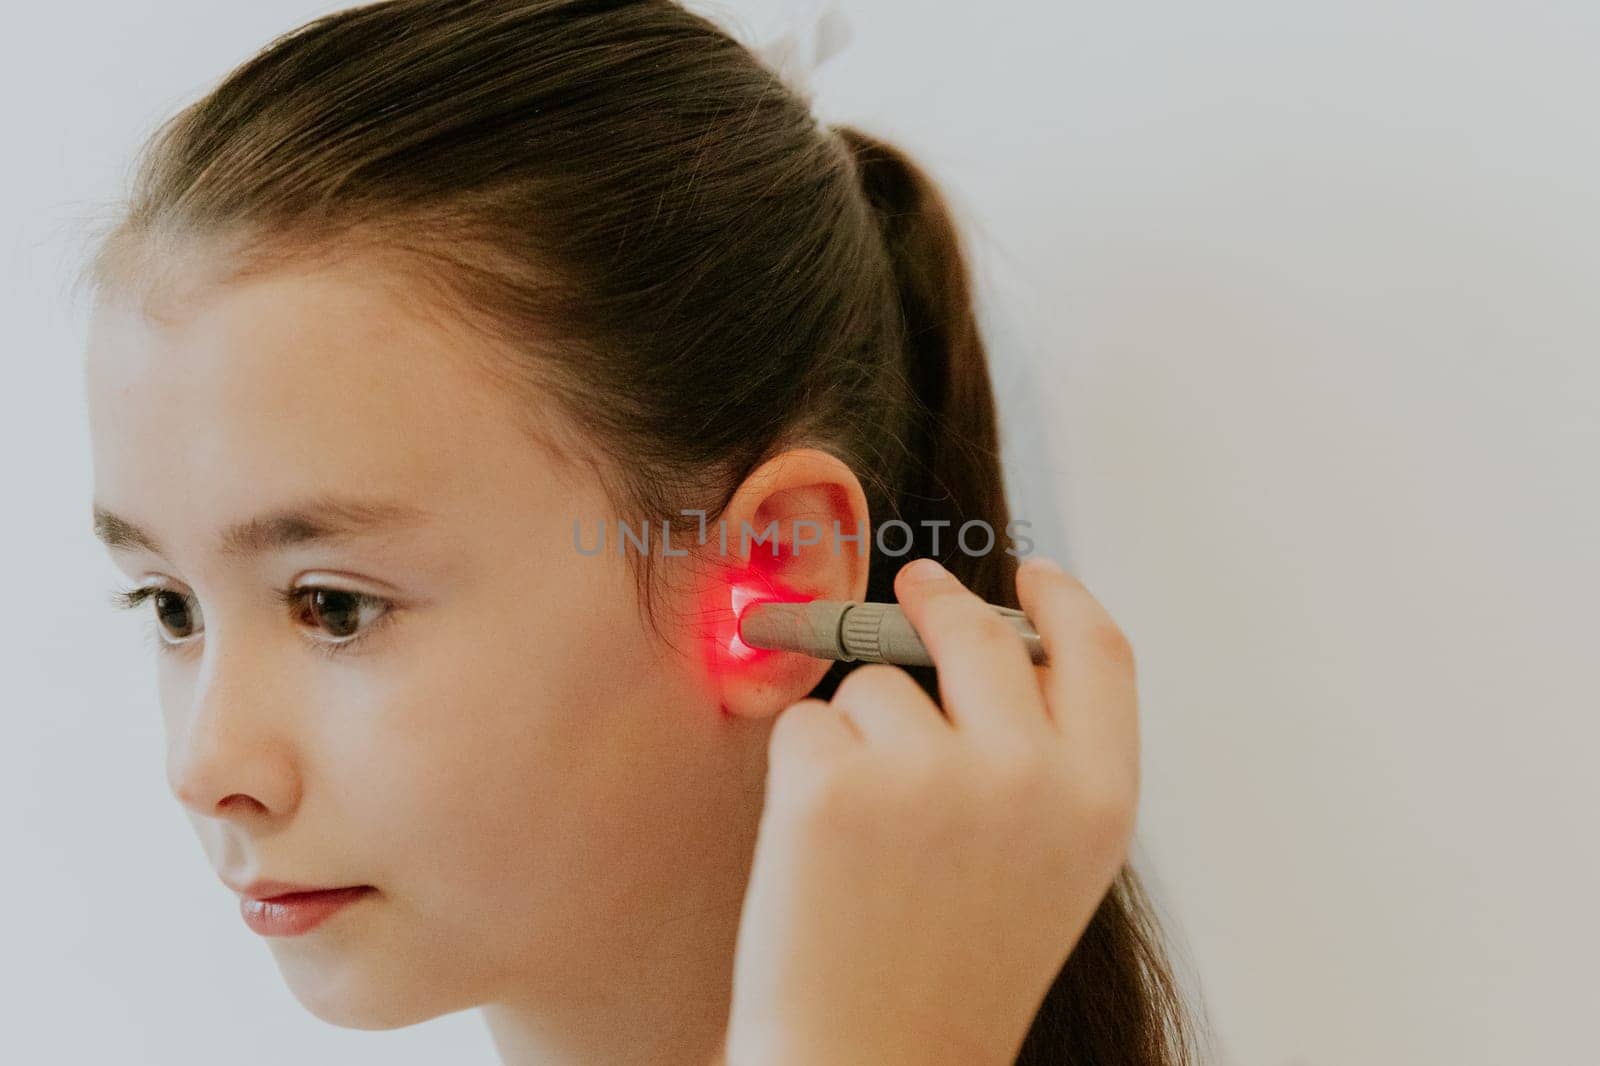 A girl treats her ear with an infrared light device. by Nataliya